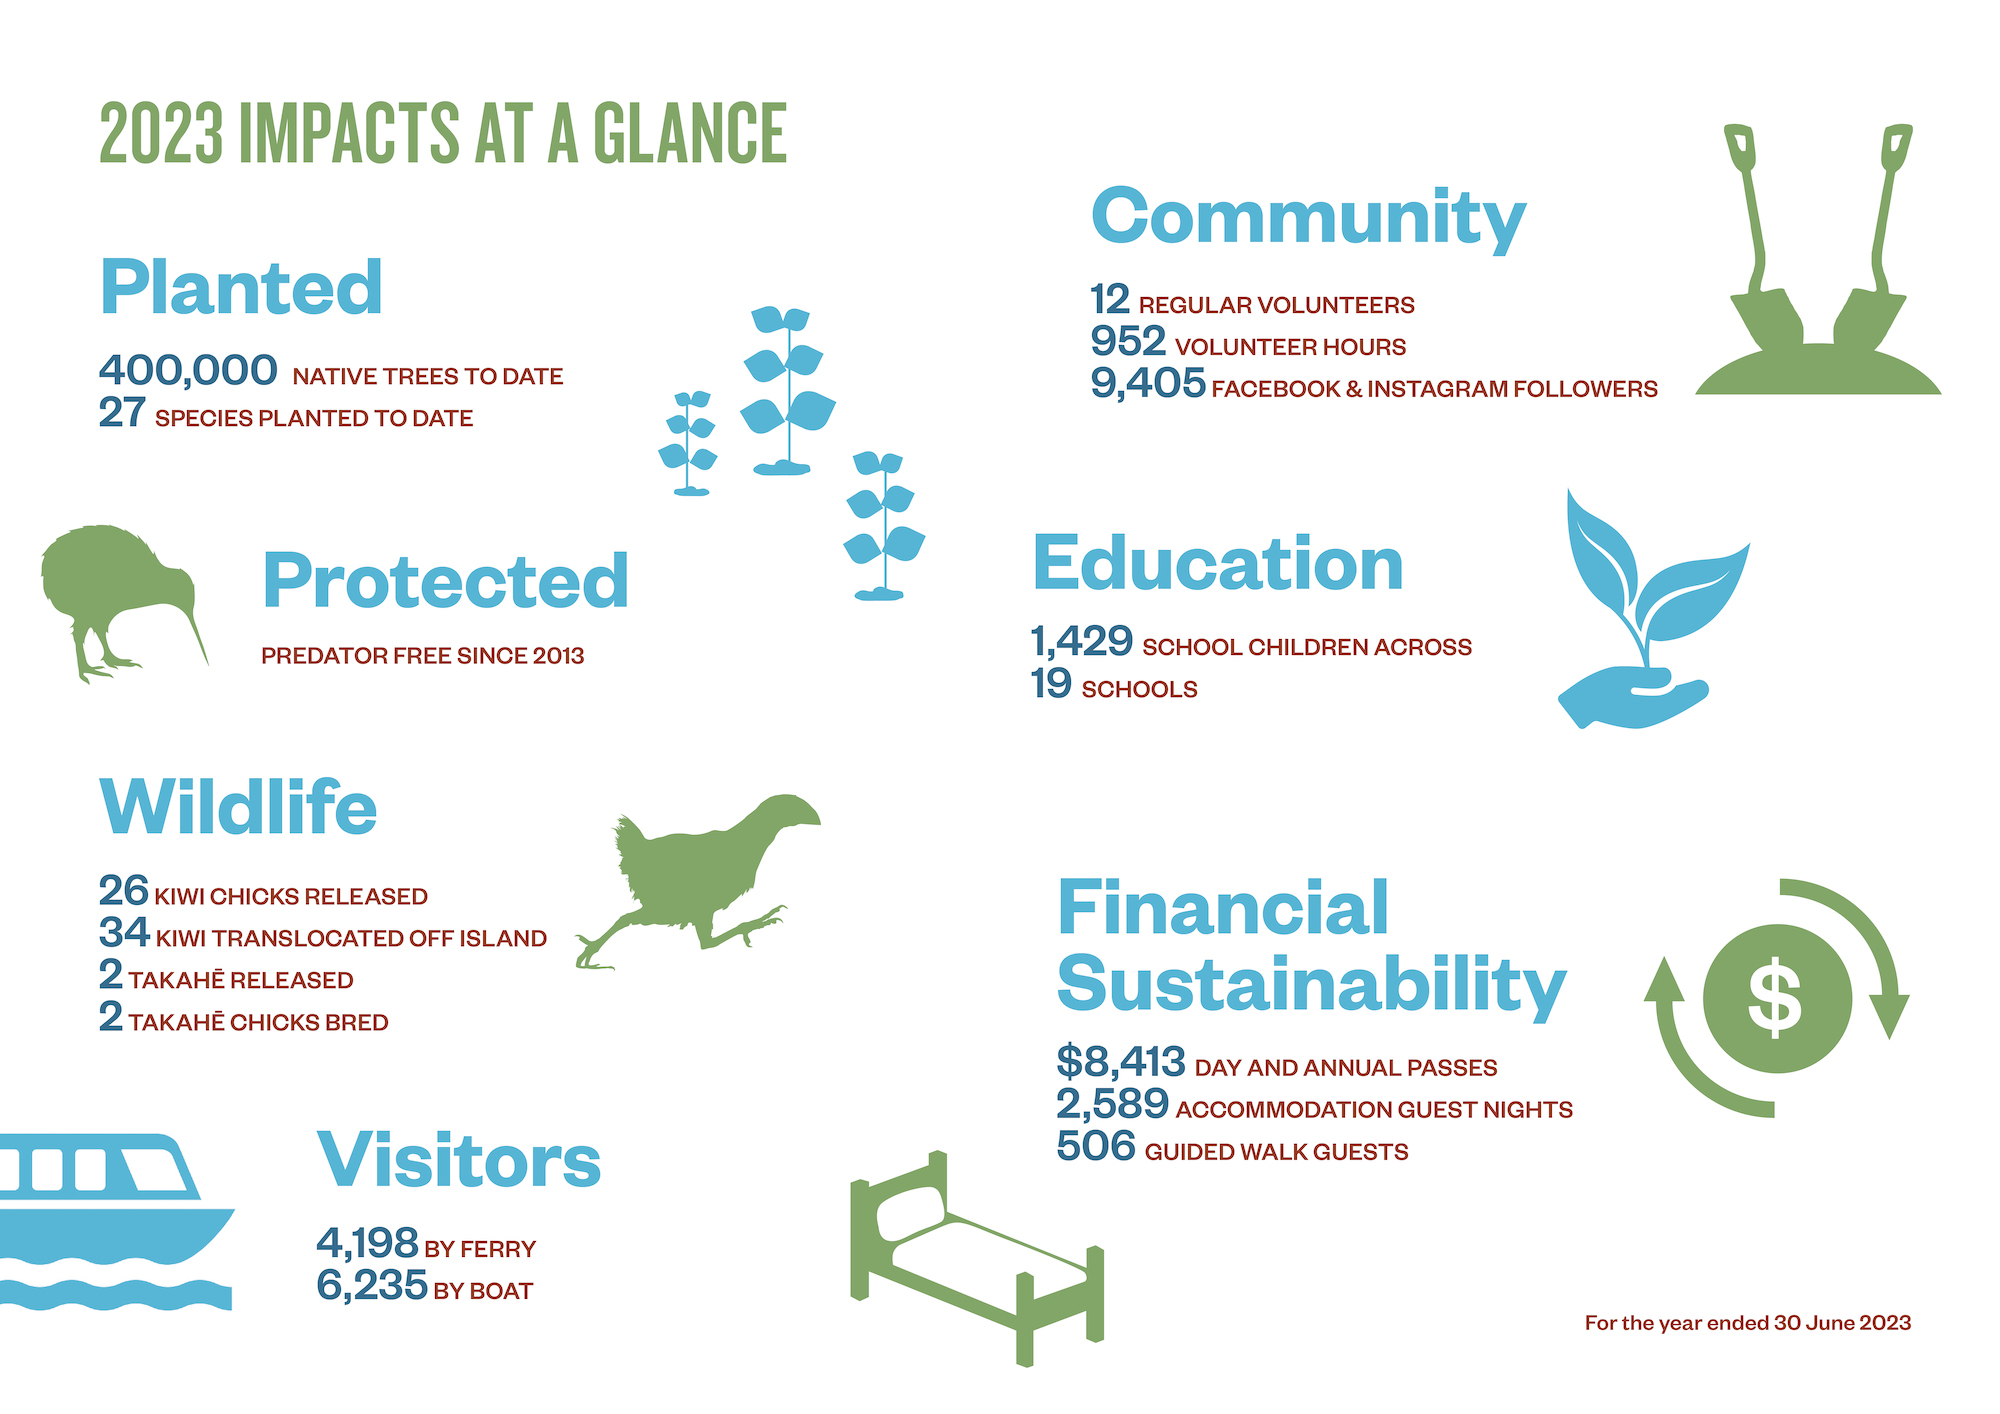 2023 Impacts at a Glance